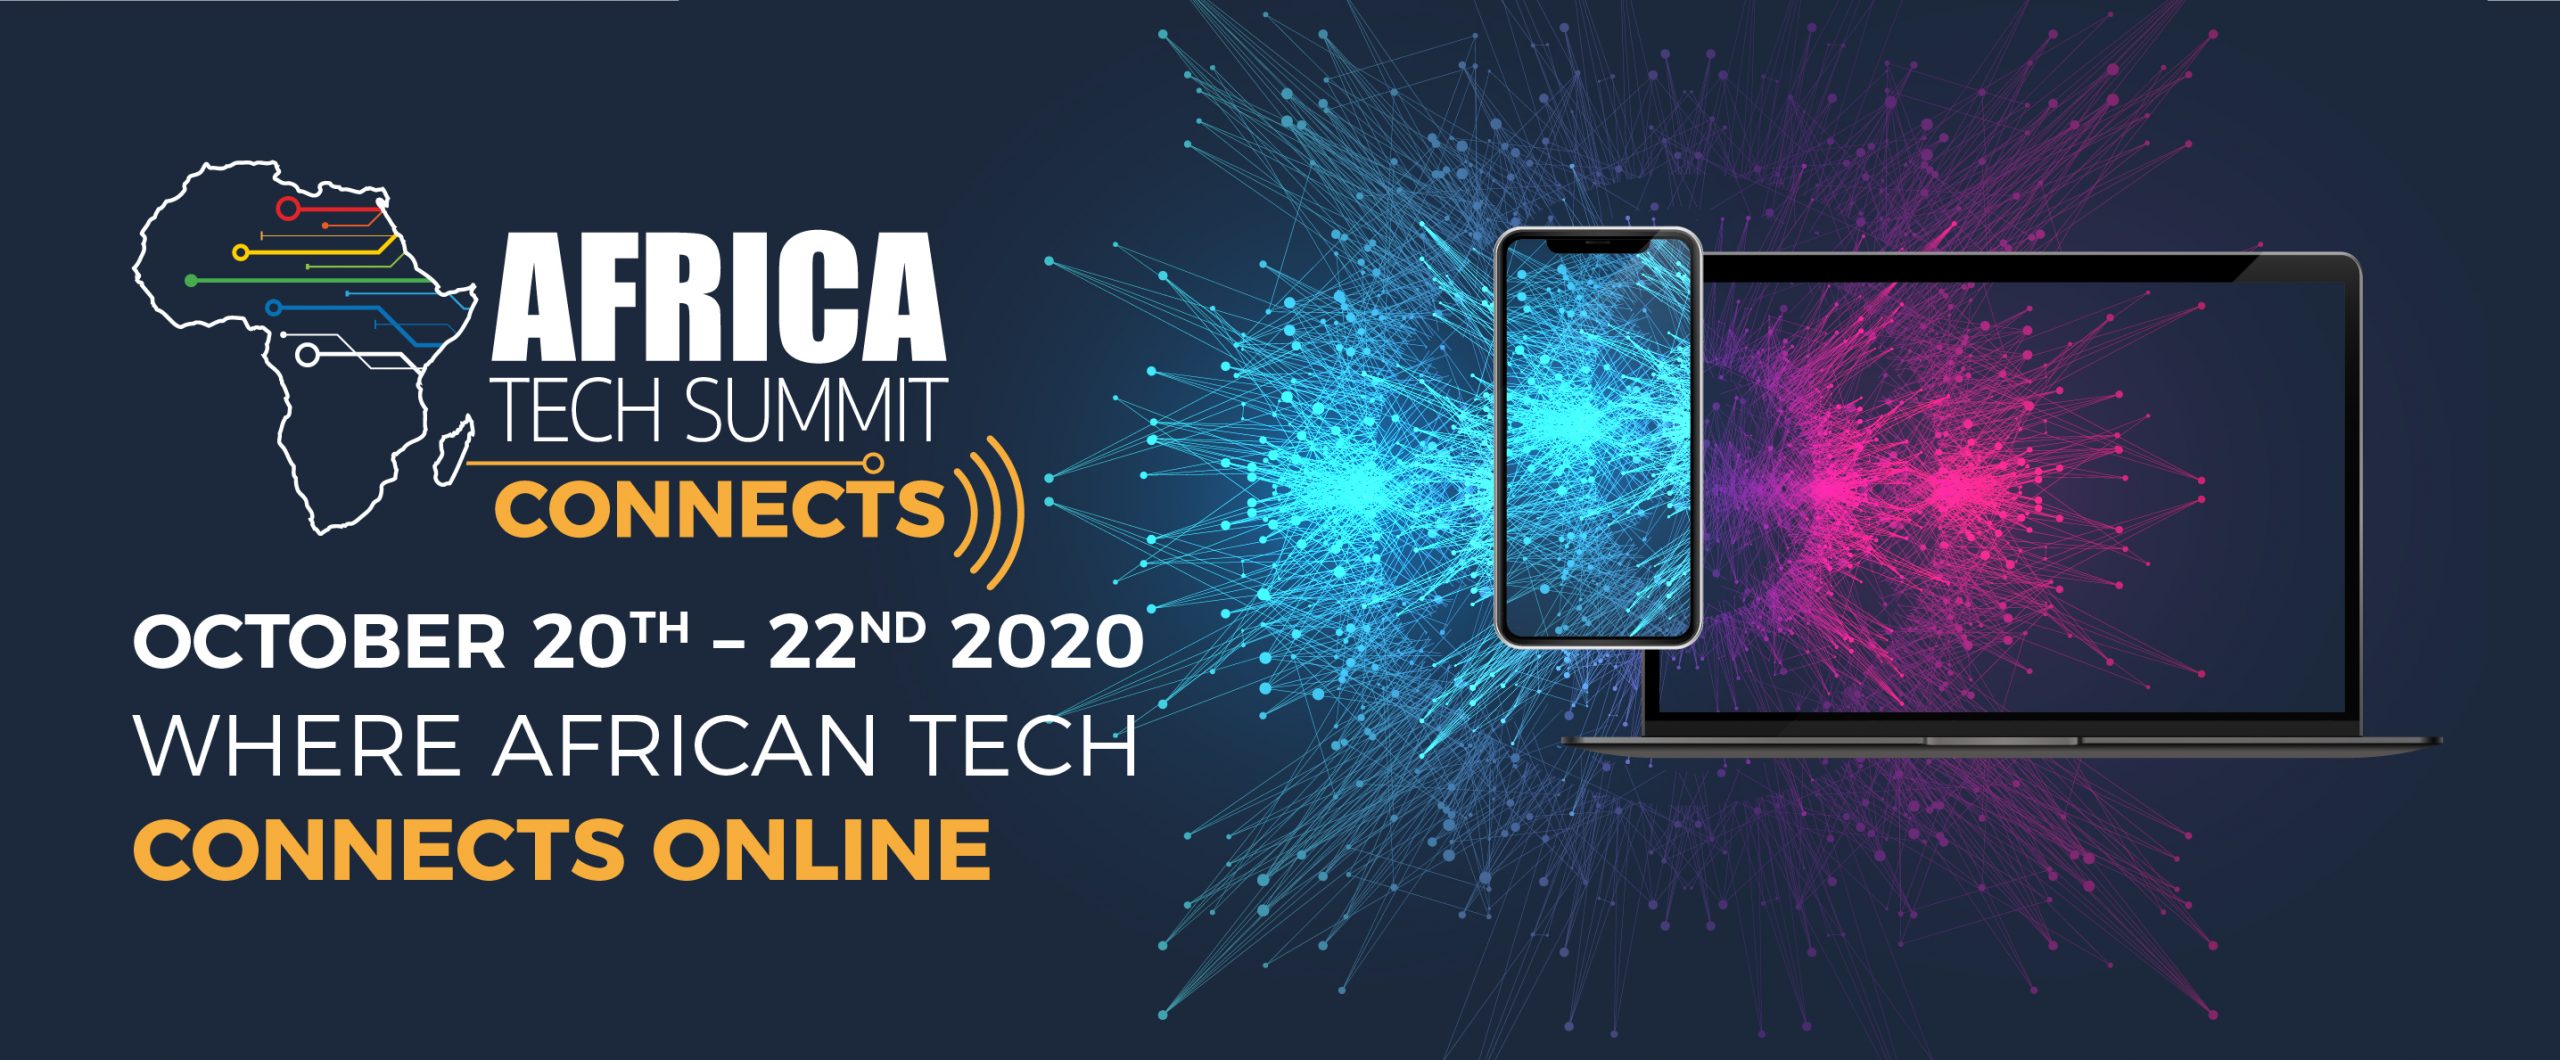 Africa Tech Summit Connects set to drive business and investment with 1st online event